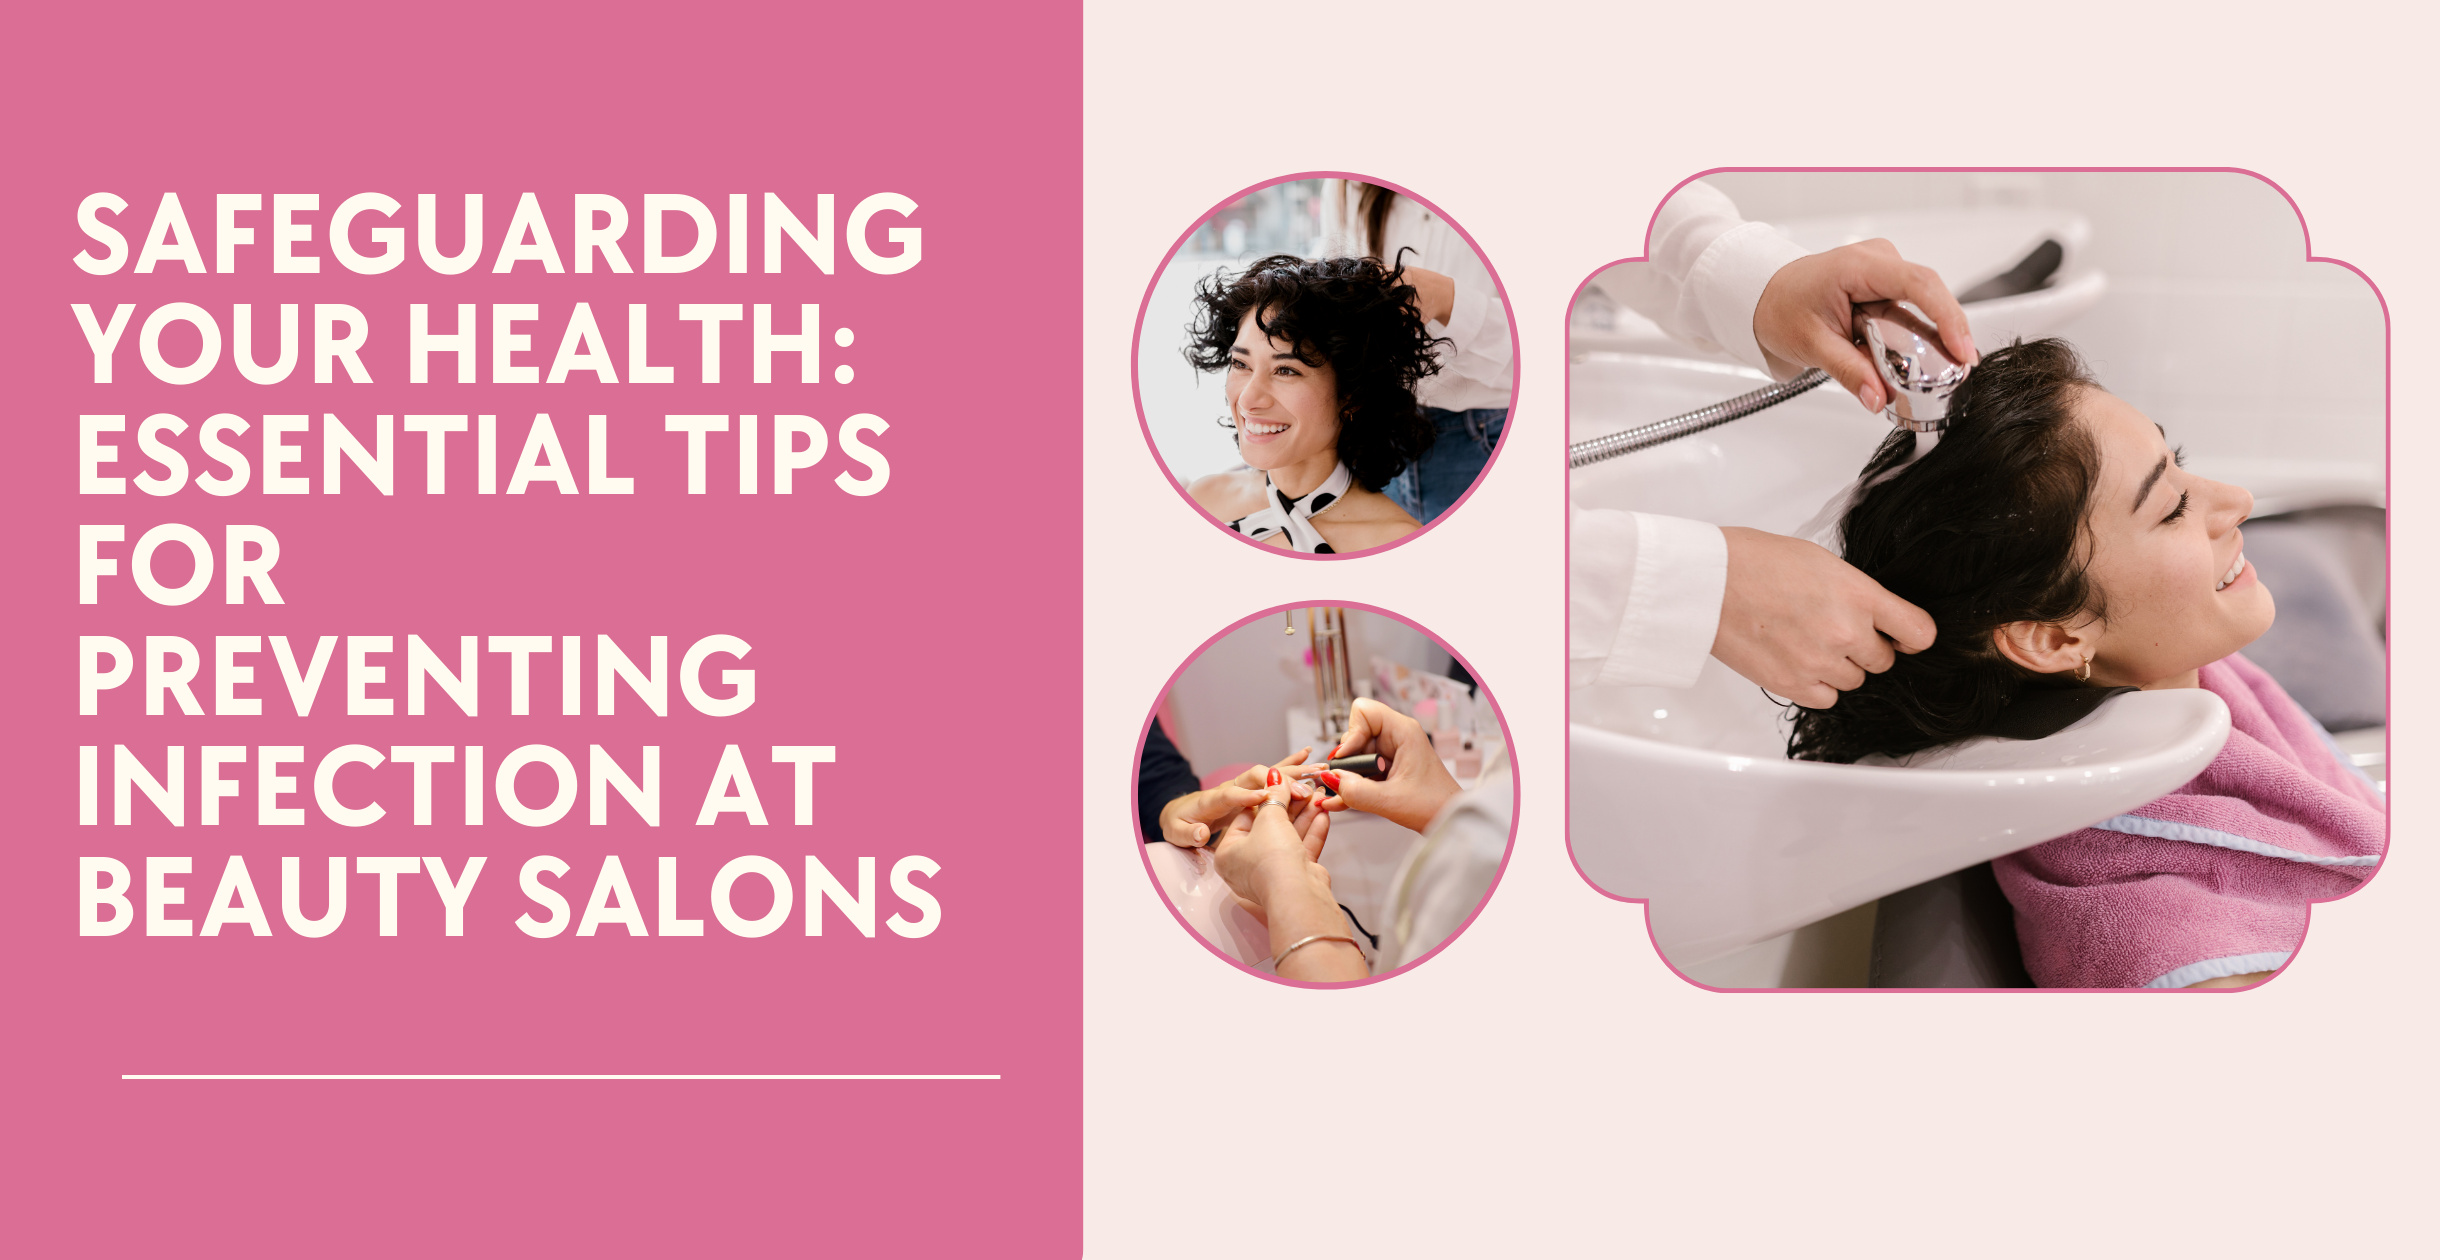 Safeguarding Your Health: Essential Tips for Preventing Infection at Beauty Salons